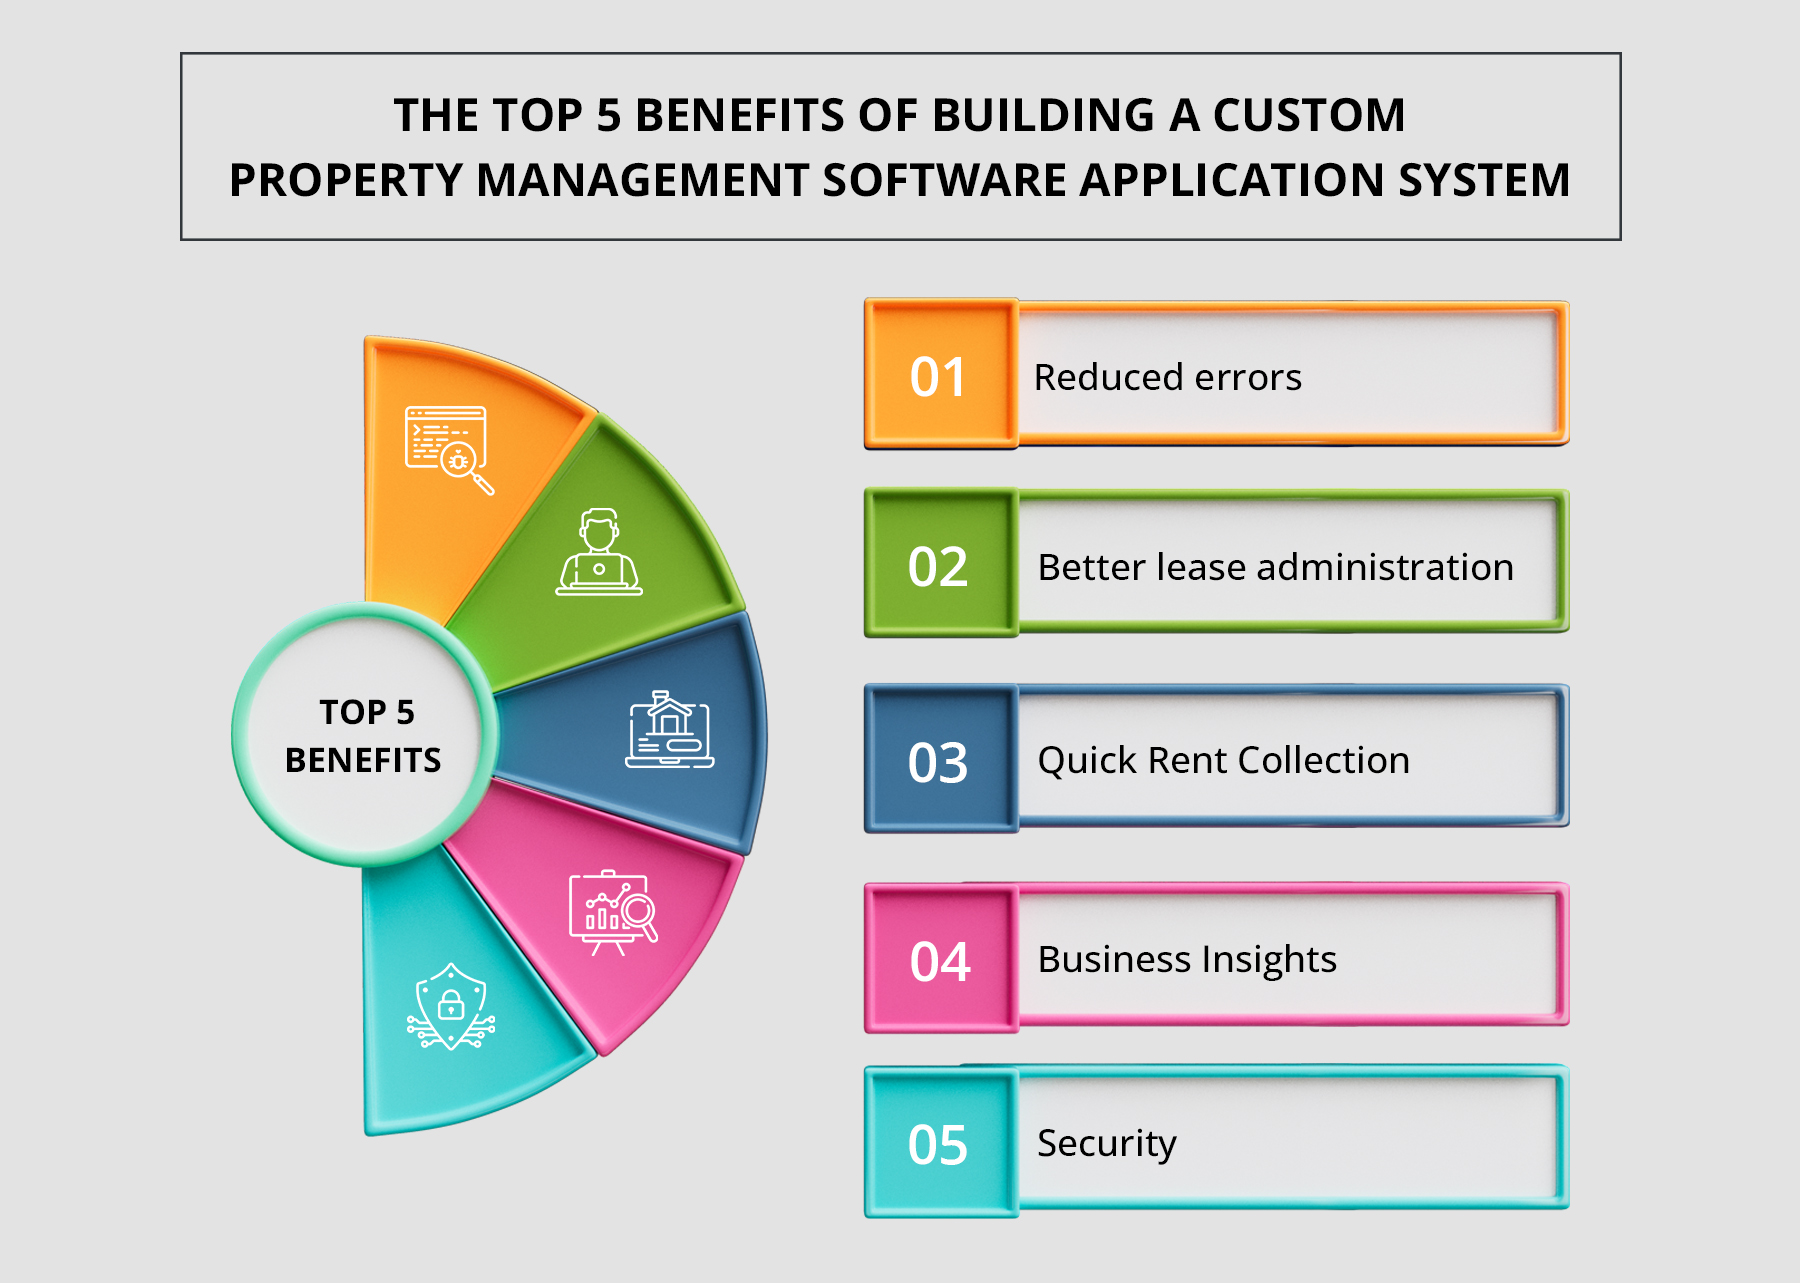 Benefits of building a custom property management software application system